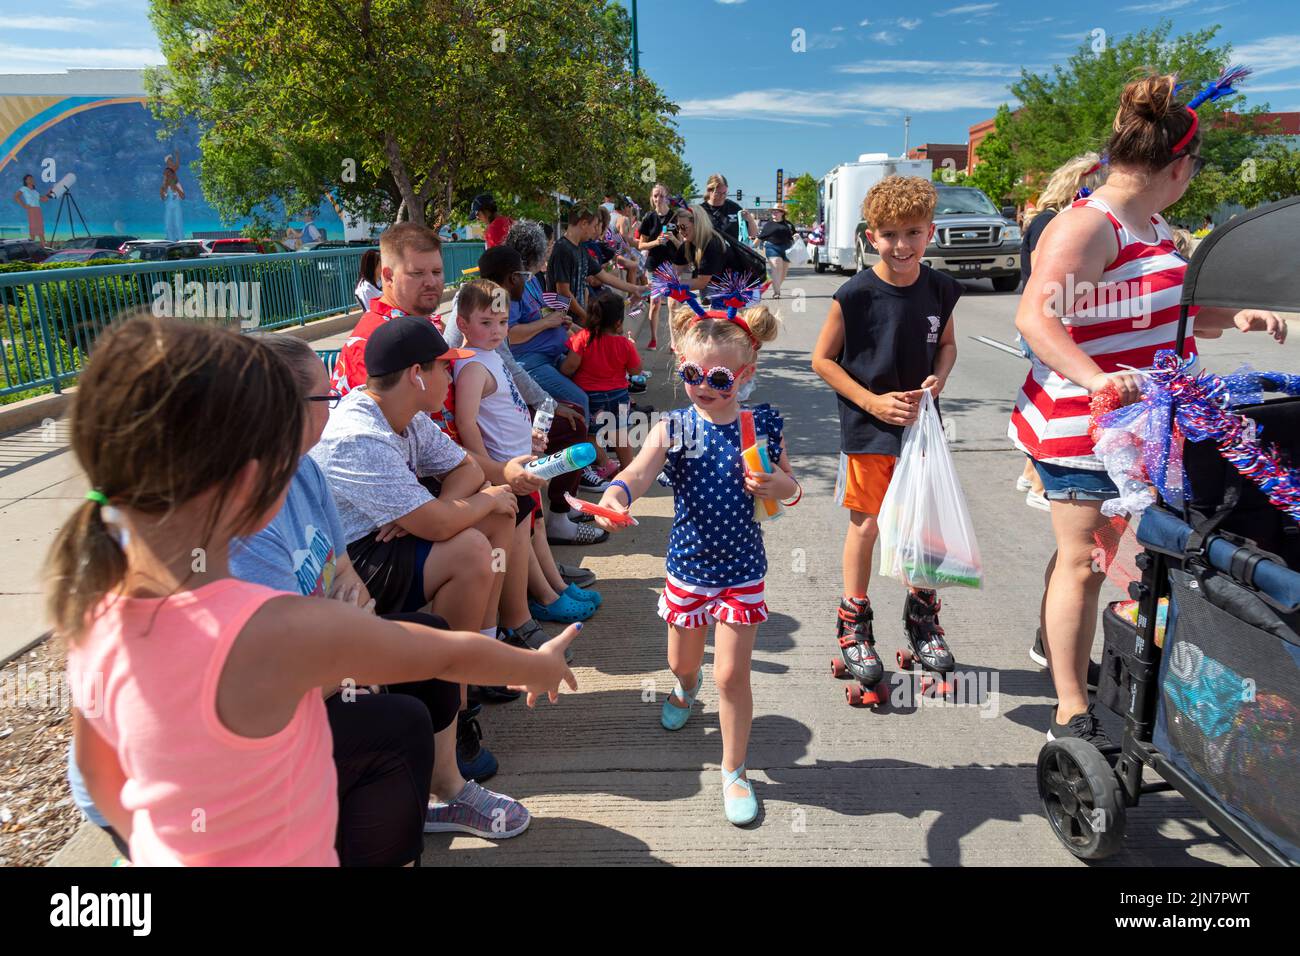 Hutchinson, Kansas - A girl hands out treats during the annual July 4 'Patriots Parade' in rural Kansas. Stock Photo